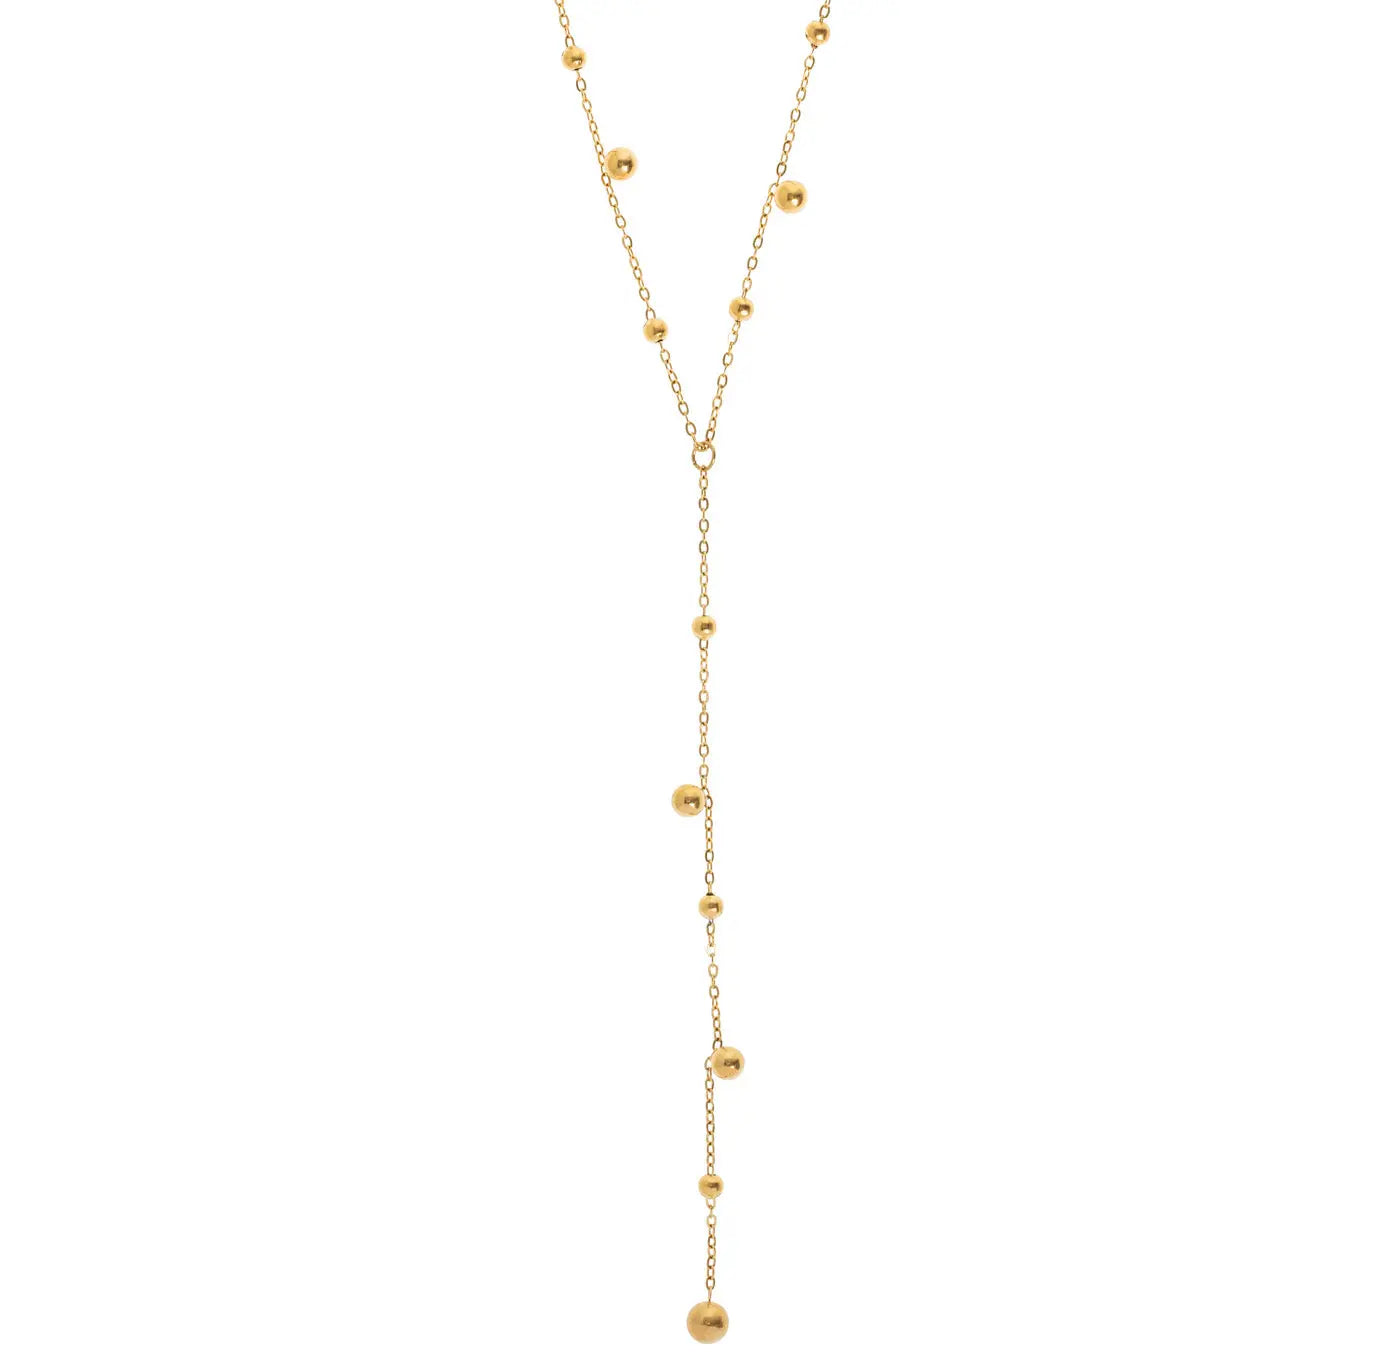 Klara - Lariat Necklace with Gold Dots Stainless Steel